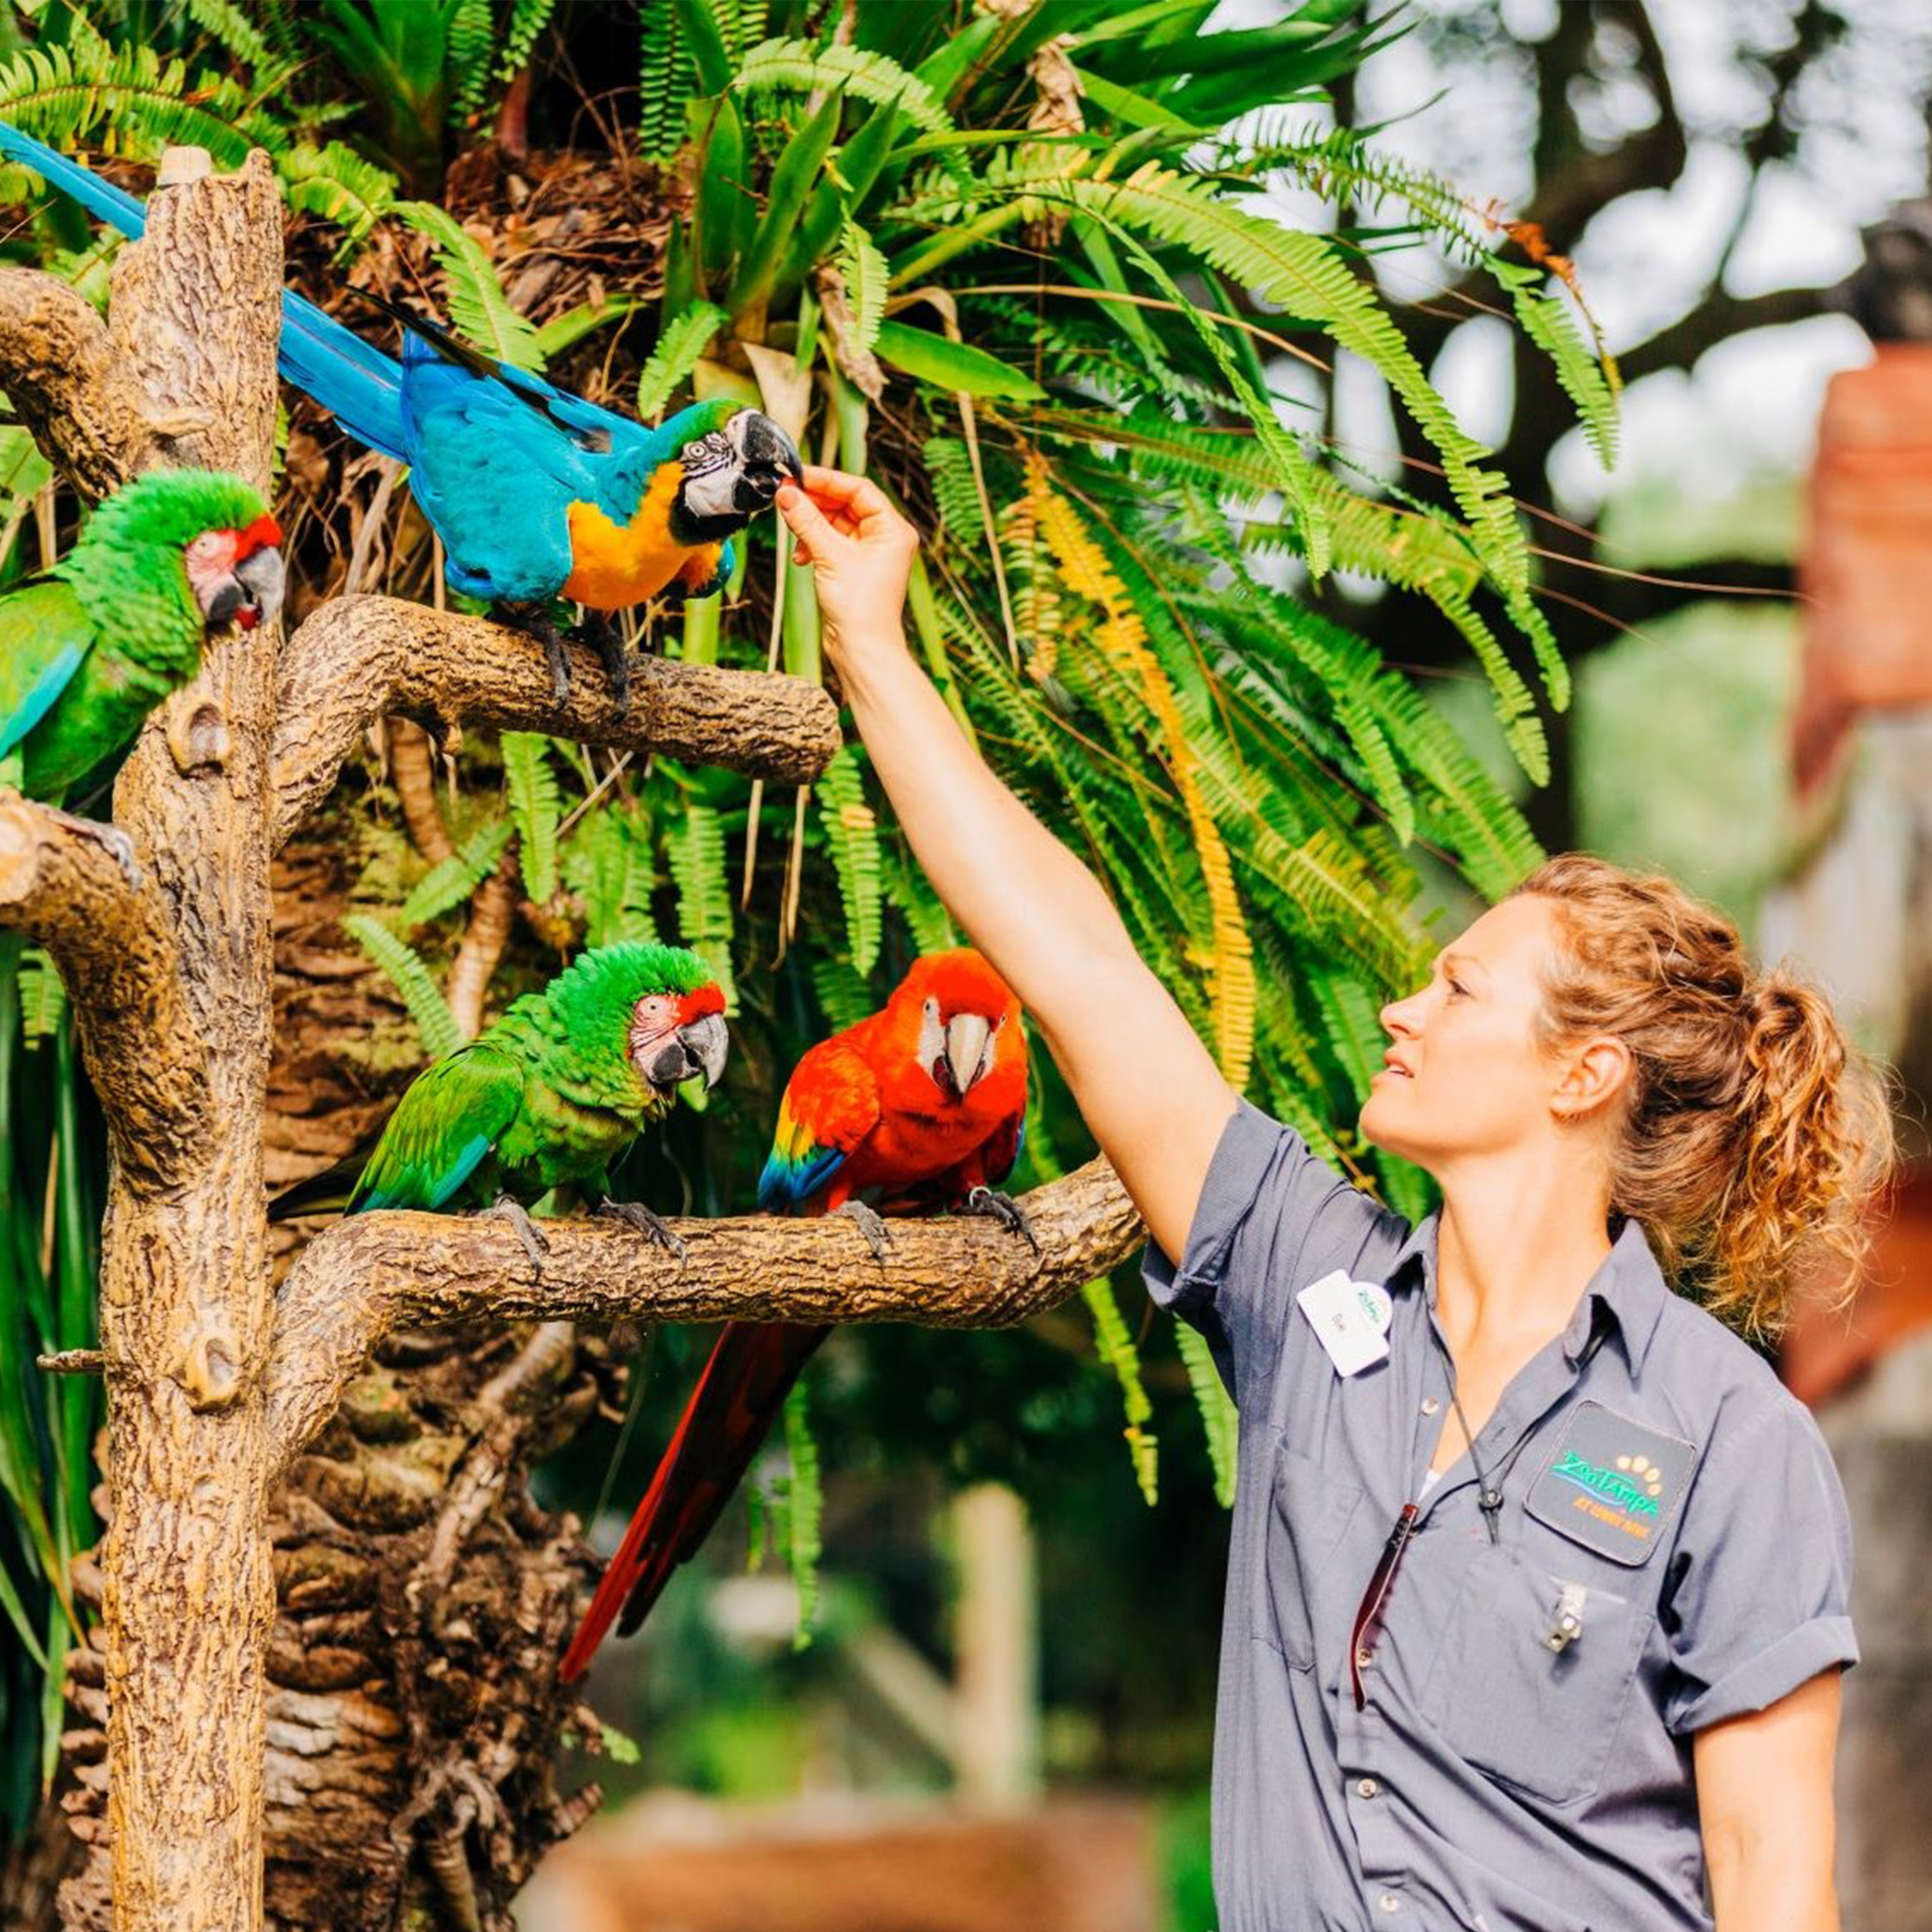 Female ZooTampa intern in grey button down shirt is reaching up to feed a blue Macaw parrot. 